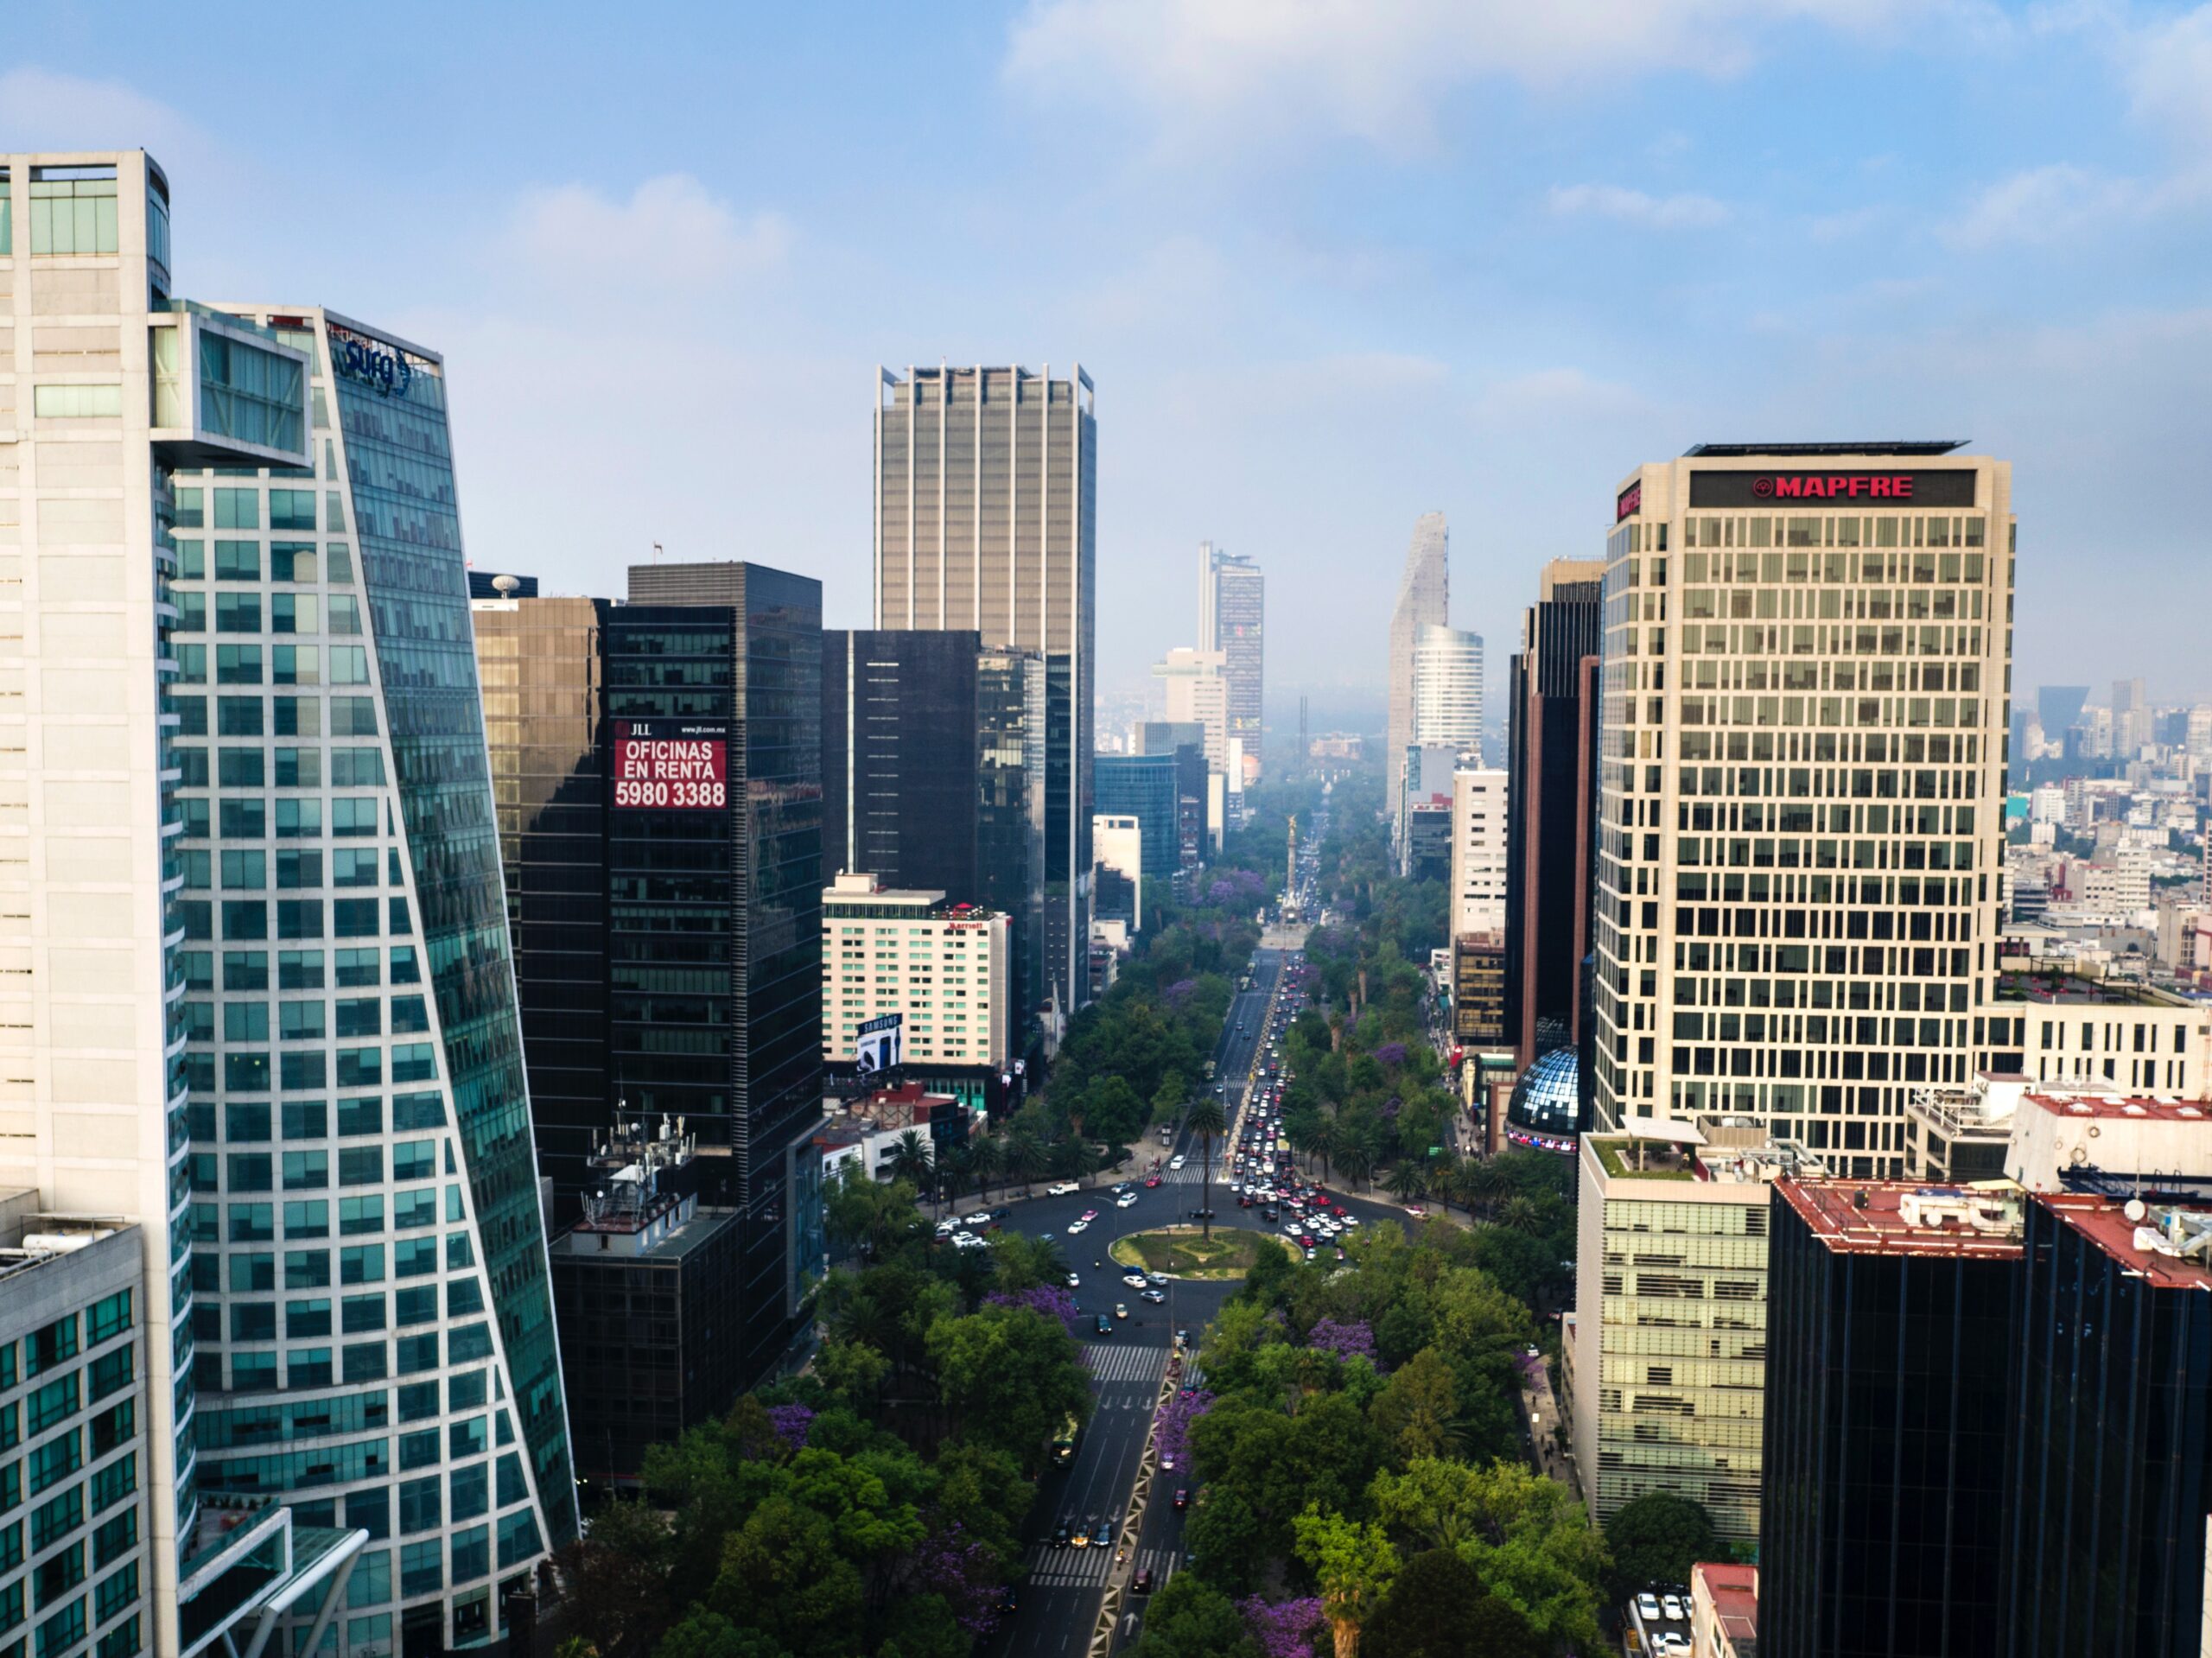 These places in Mexico City are great in terms of safety. Check out the top areas where tourists will feel safe. 
pictured: the metropolitan are of Mexico City with tall buildings and full streets